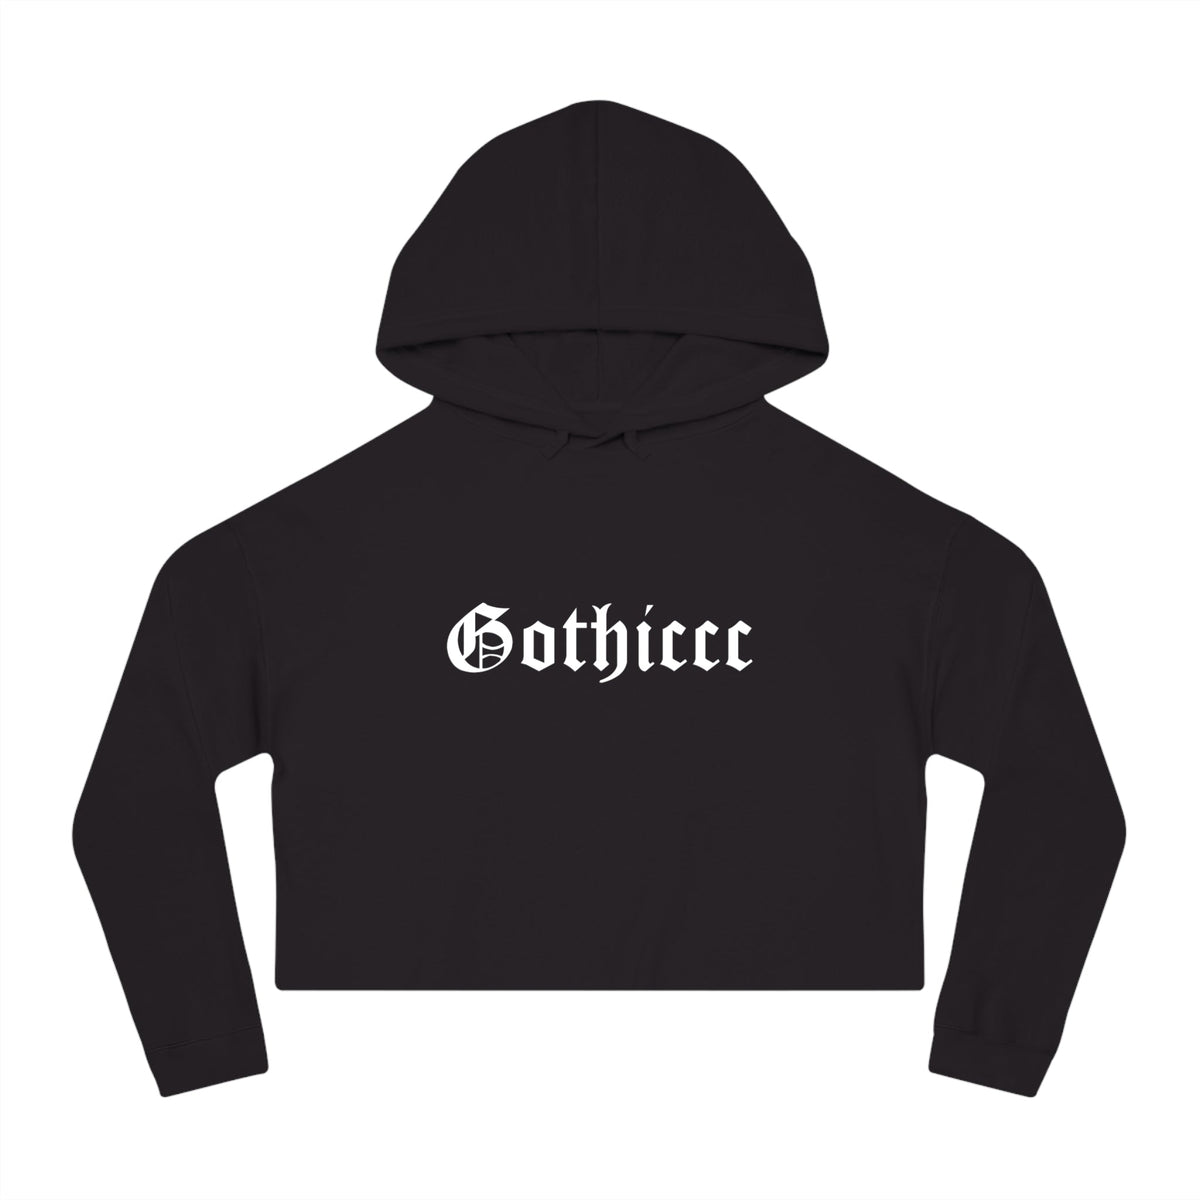 Gothiccc Women’s Cropped Hooded Sweatshirt - Goth Cloth Co.Hoodie26471977922500911893